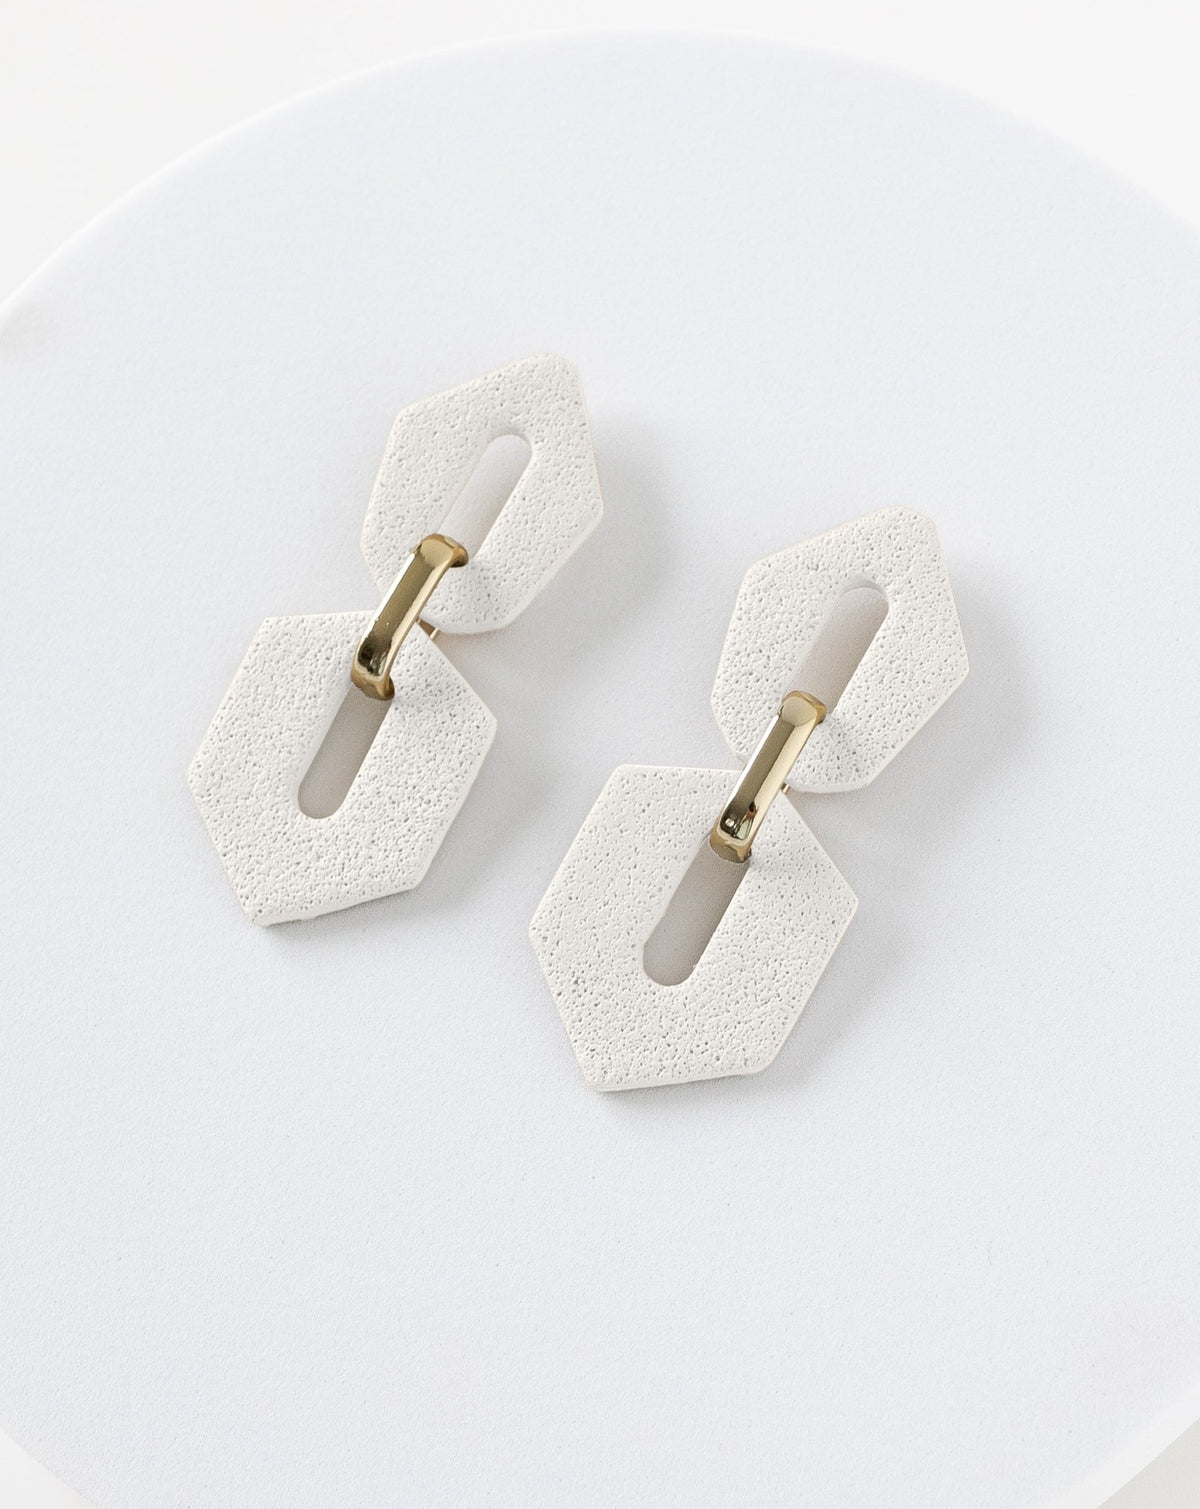 LYHO exclusive design, Shilla earrings in White color, angled color.